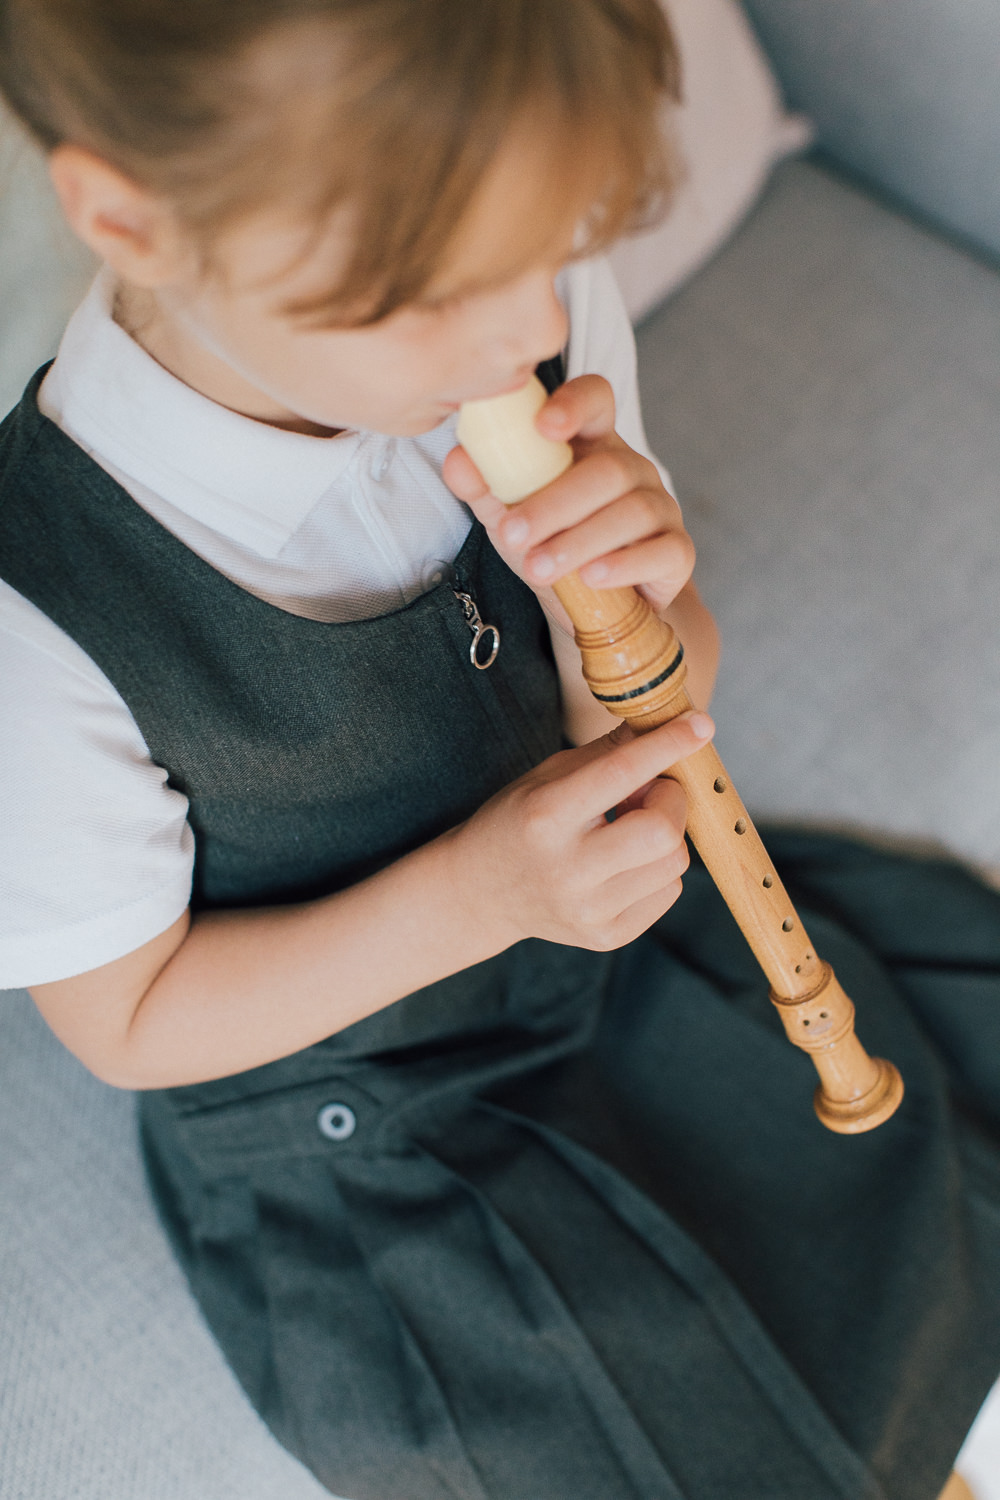 Grey Pinafore & White Polo Shirt | Recorder | Musical Instruments | School Pinafore | Back To School | Preparing For The School Term With Tesco School Uniform